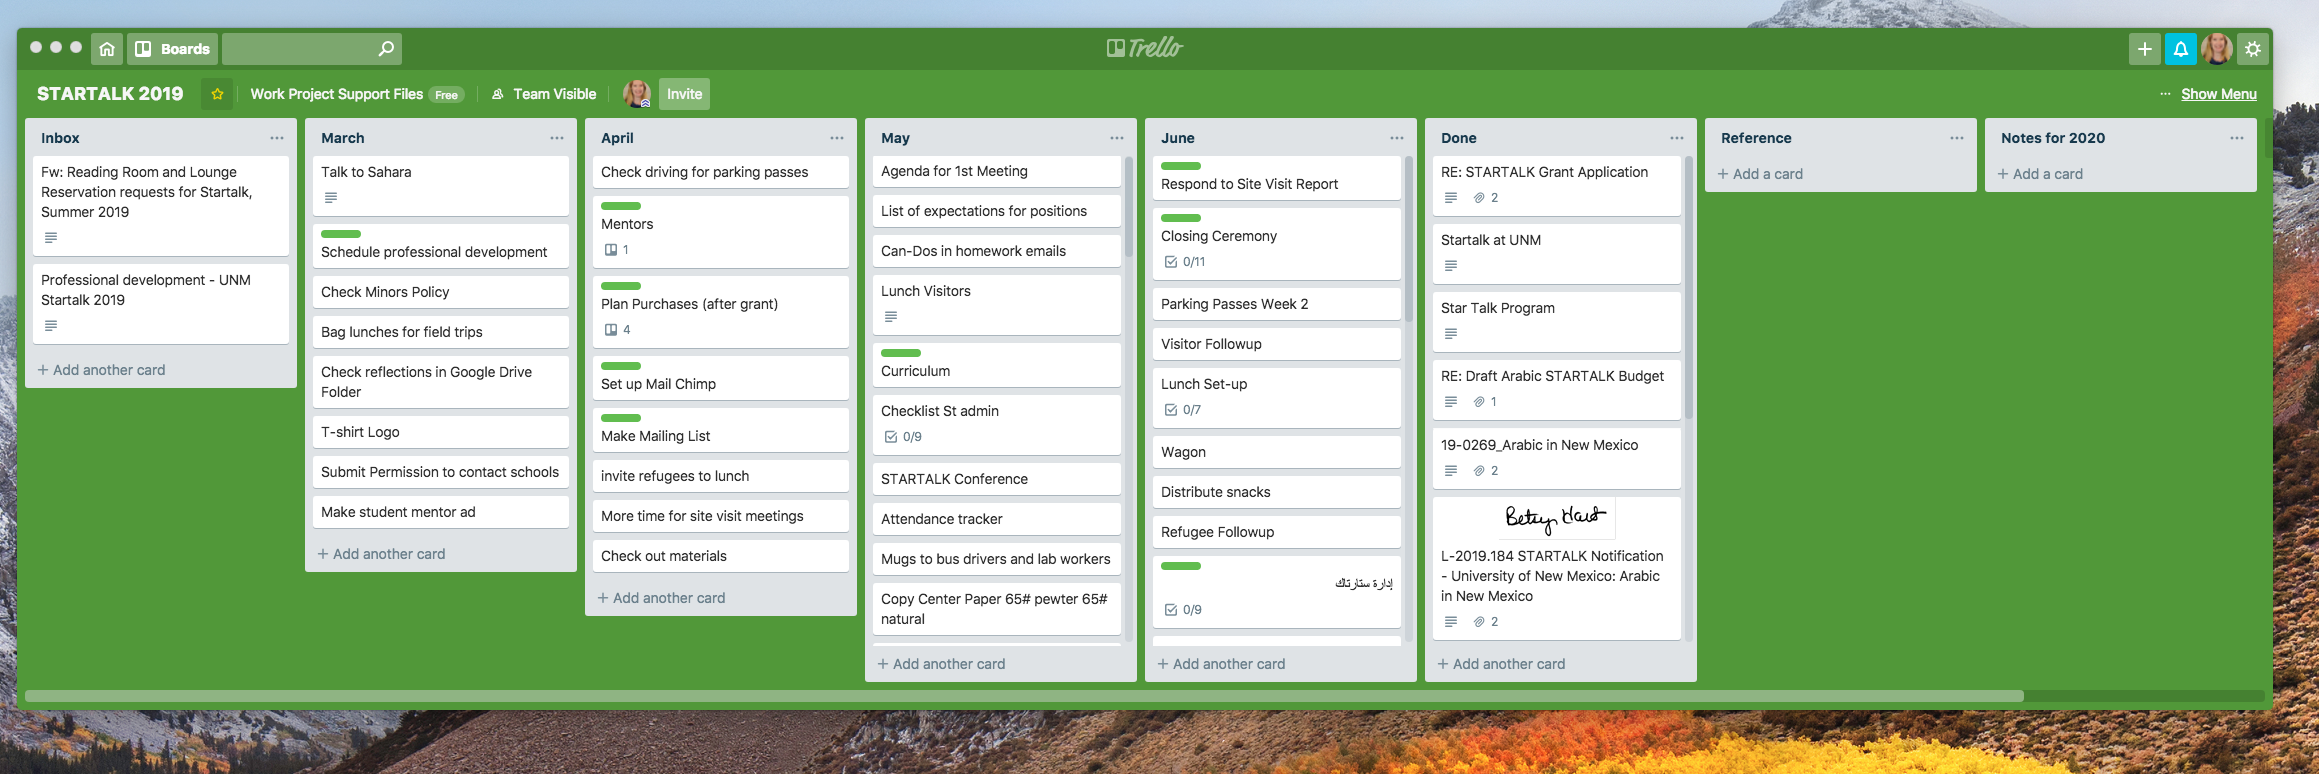 Using Trello to organize large events and programs